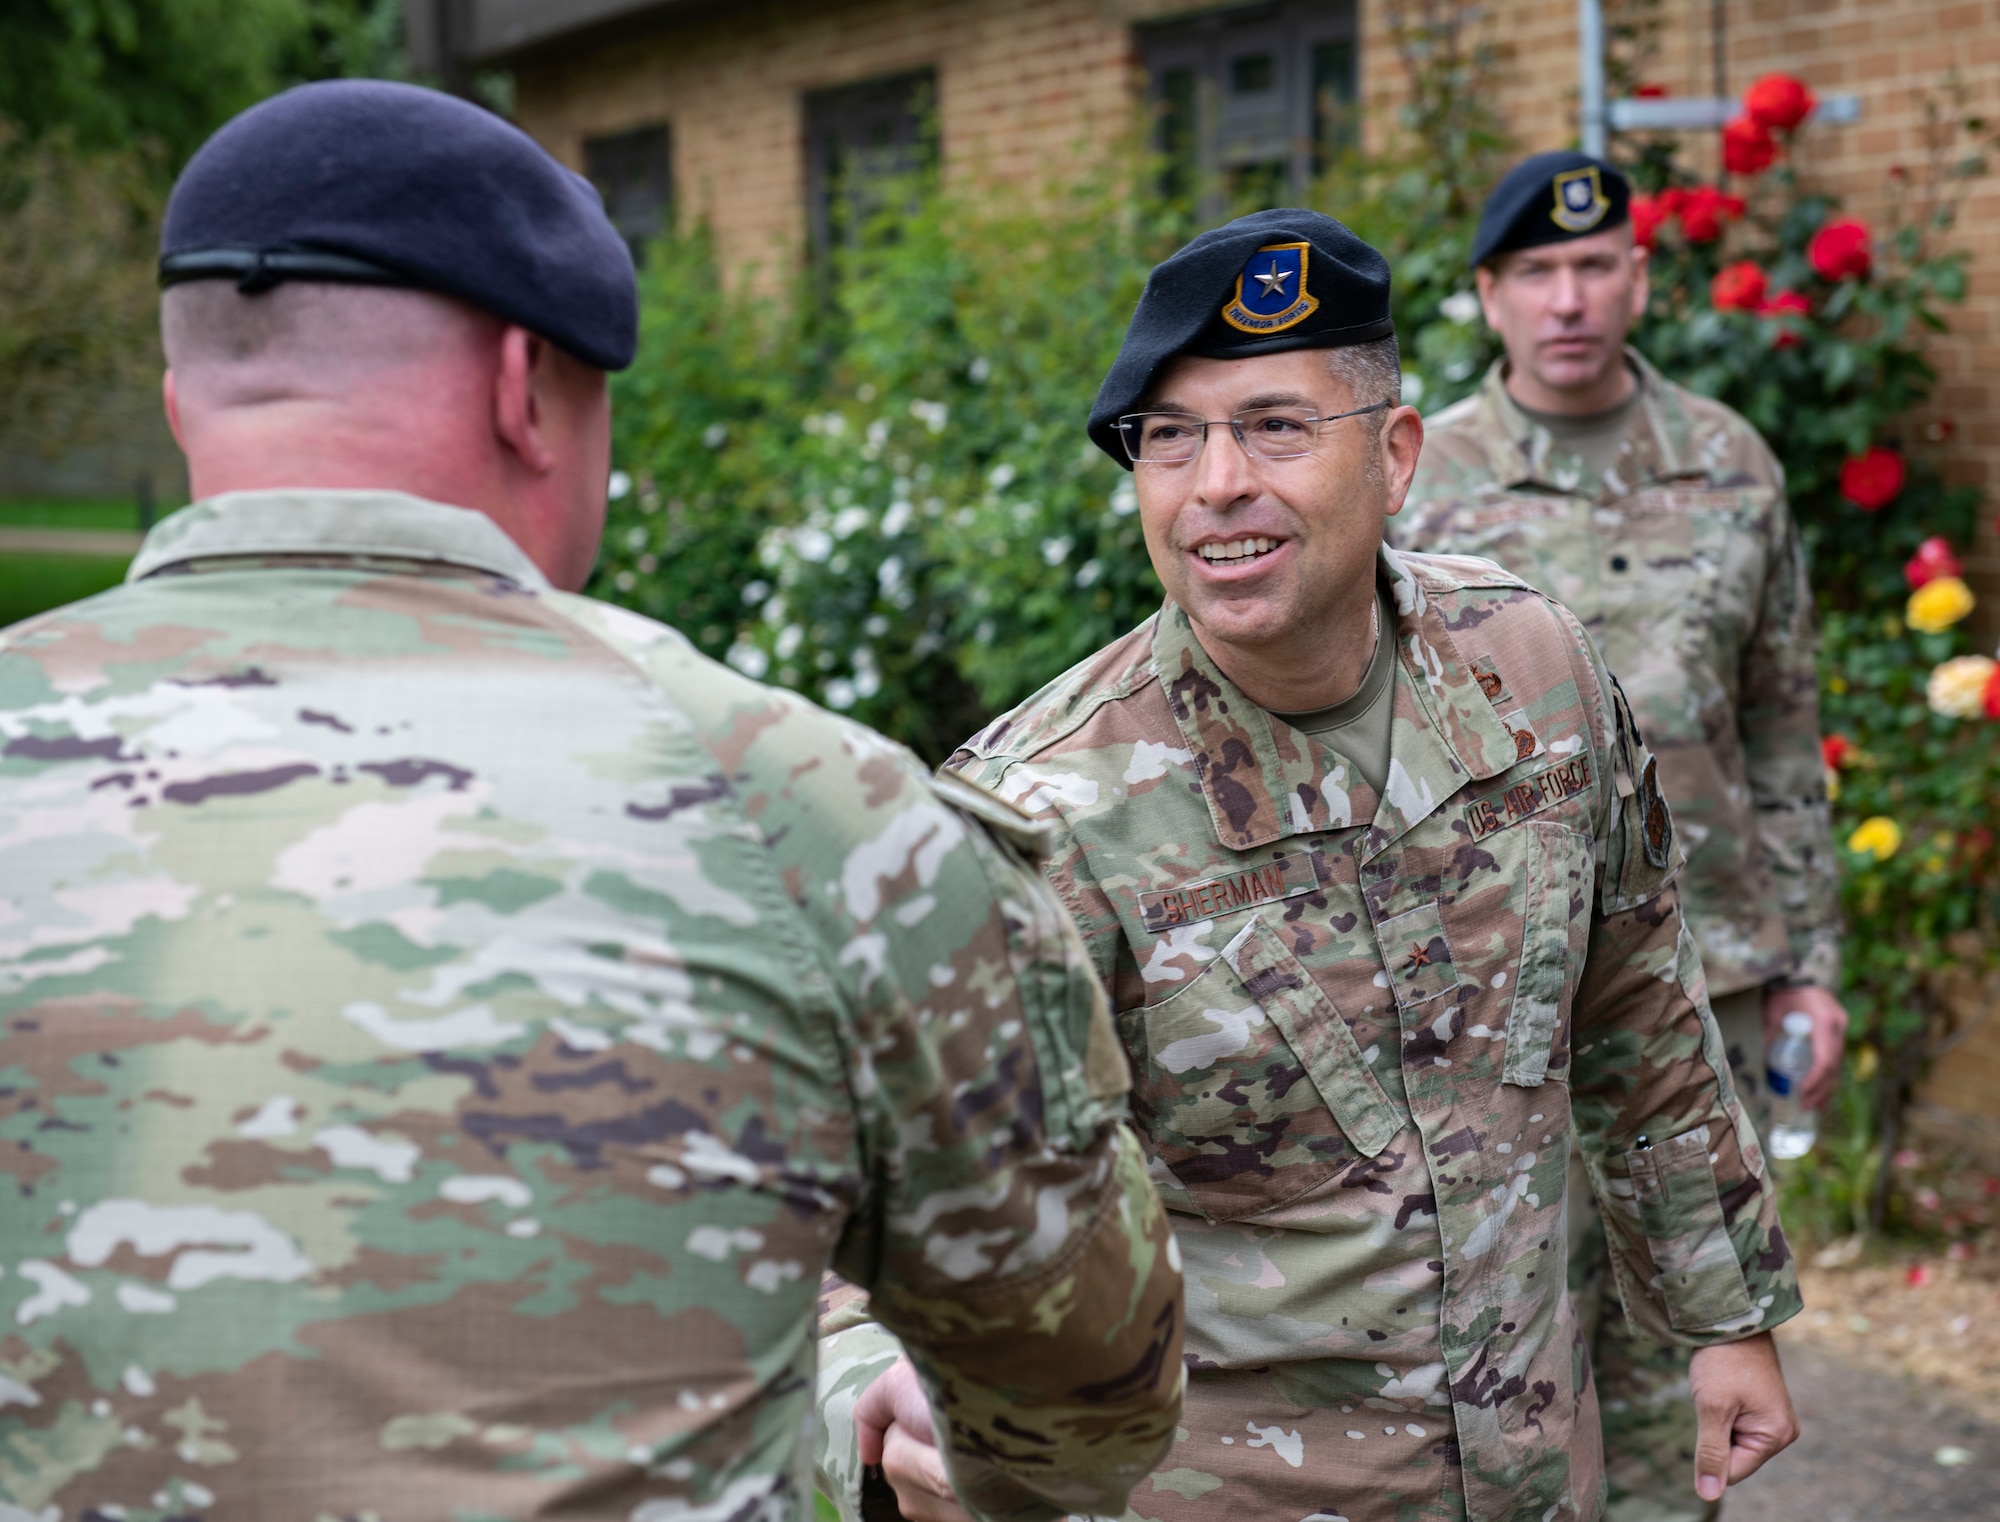 Brig. Gen. Thomas Sherman, U.S. Air Force director of security forces, shakes hands with an Airman from the 422d Security Forces Squadron at RAF Croughton